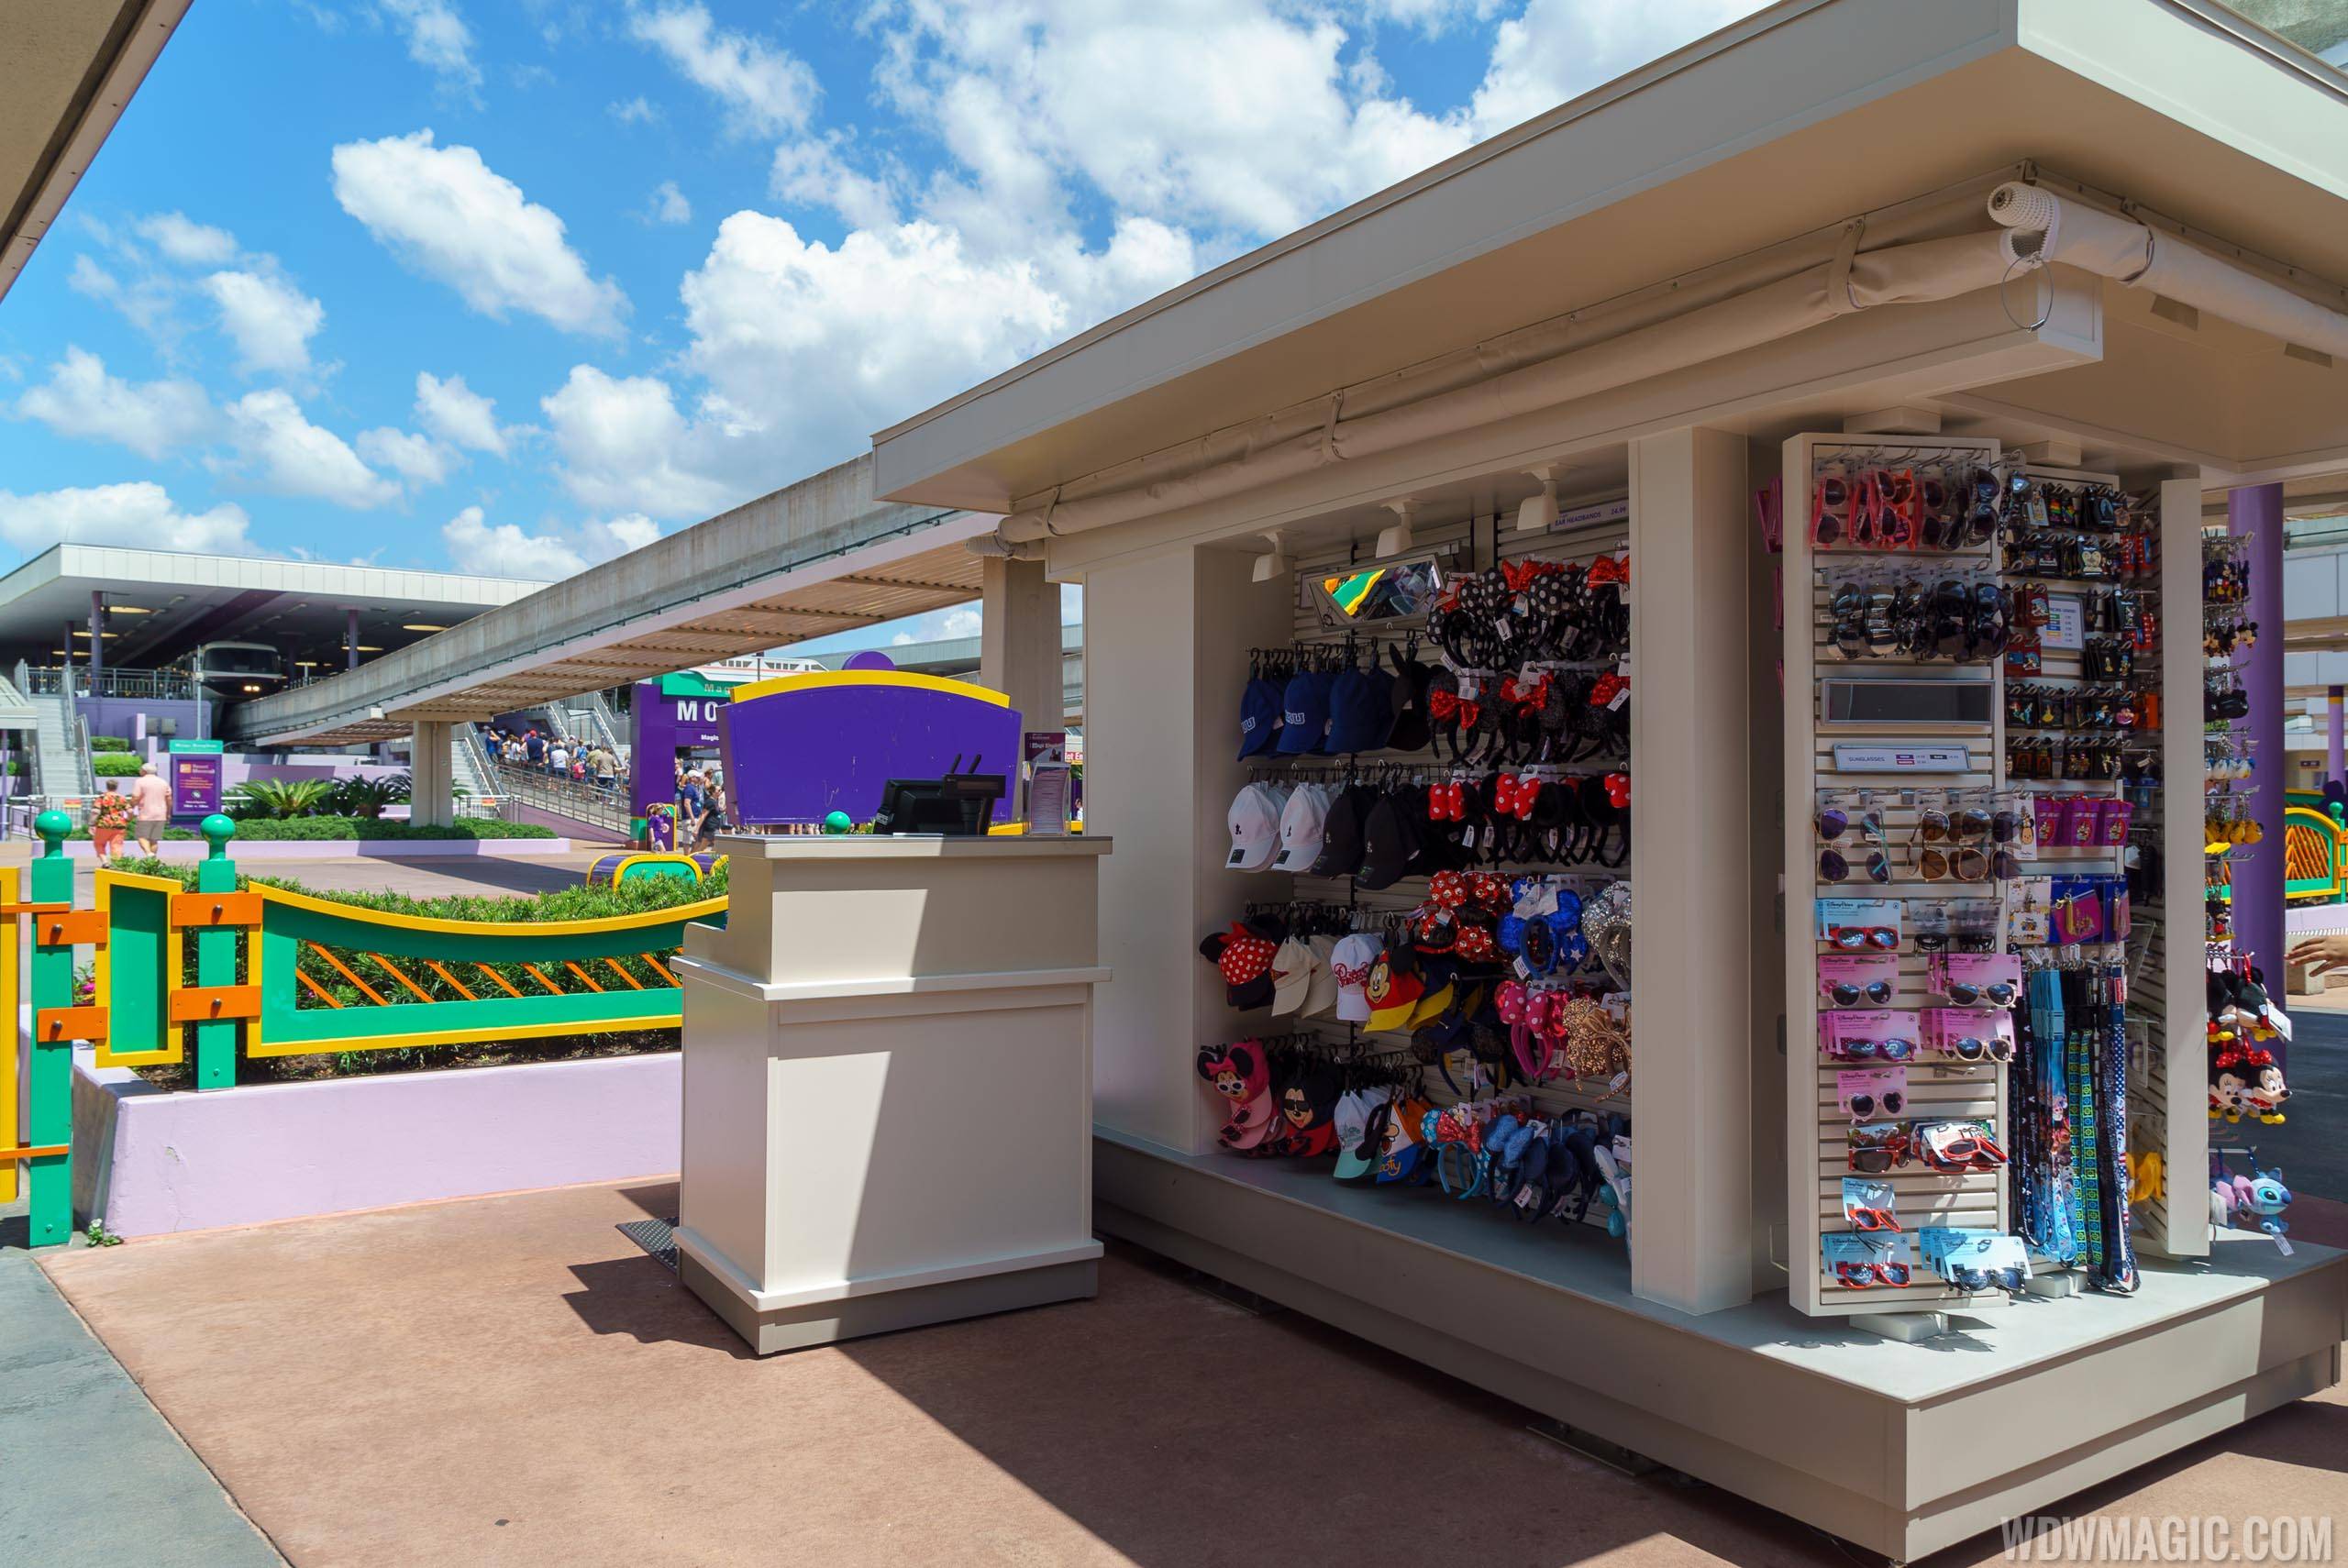 PHOTOS - New merchandise location at the Transportation and Ticket Center